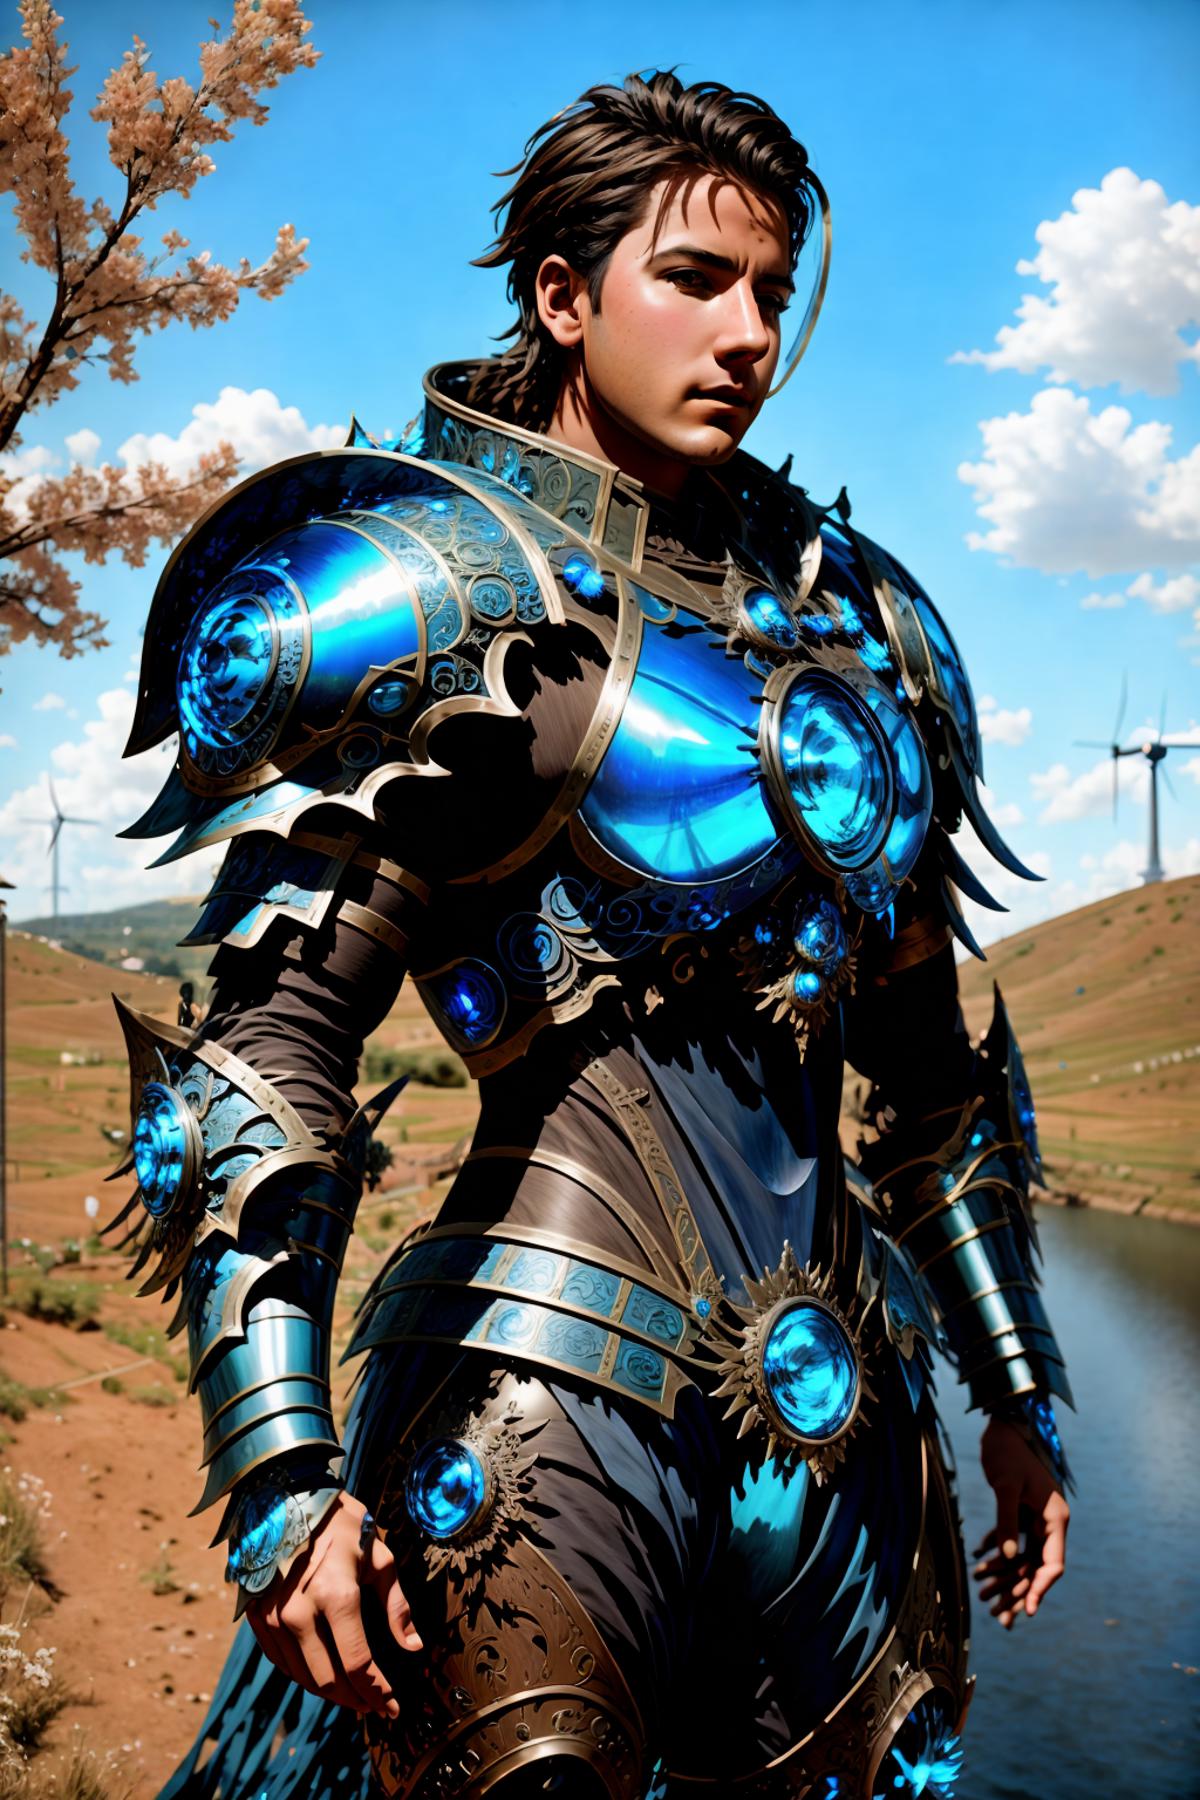 Armor from HaDeS image by DeViLDoNia